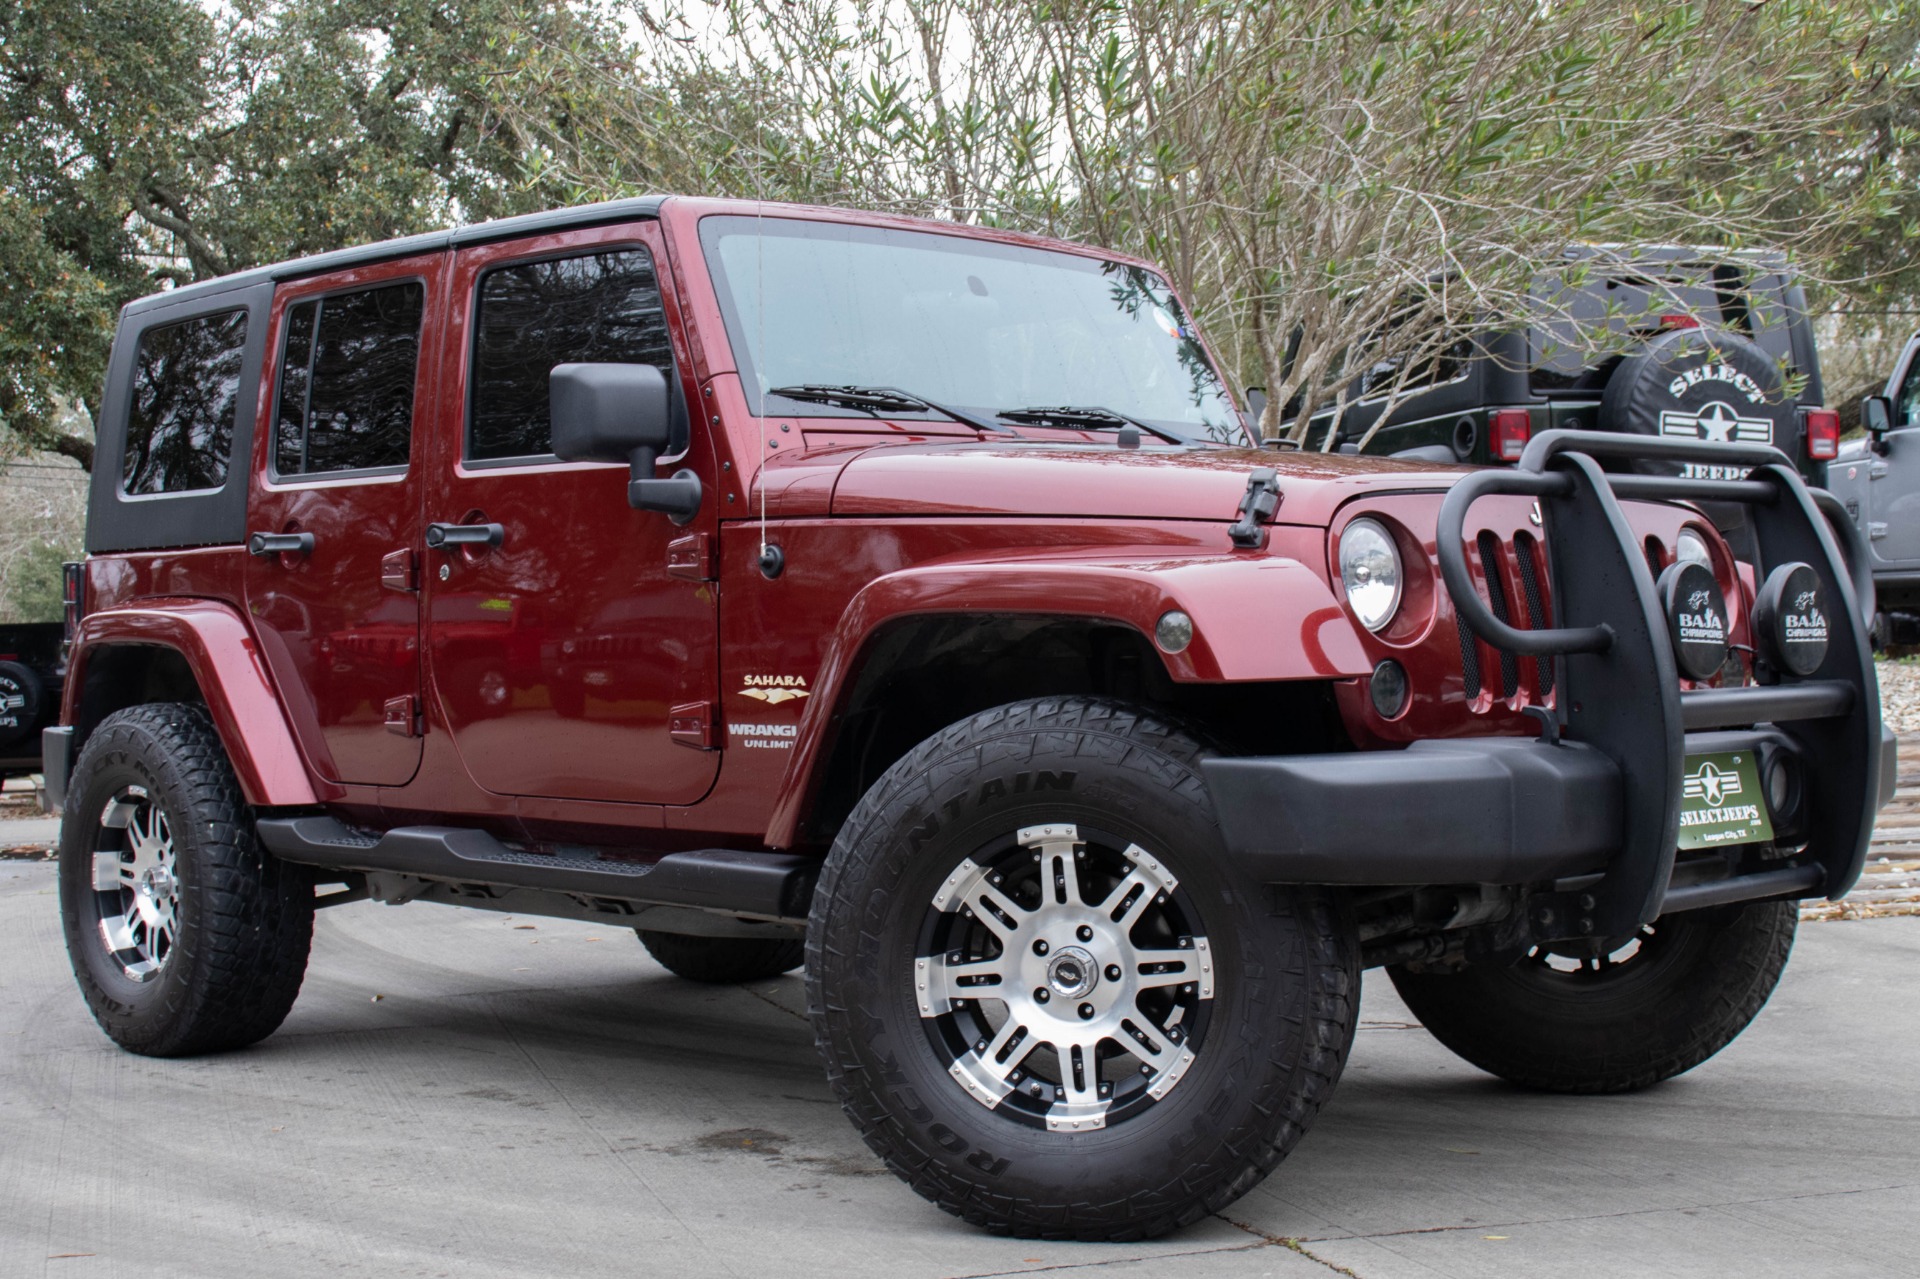 Used 2007 Jeep Wrangler Unlimited Sahara For Sale ($22,995) | Select Jeeps  Inc. Stock #116748